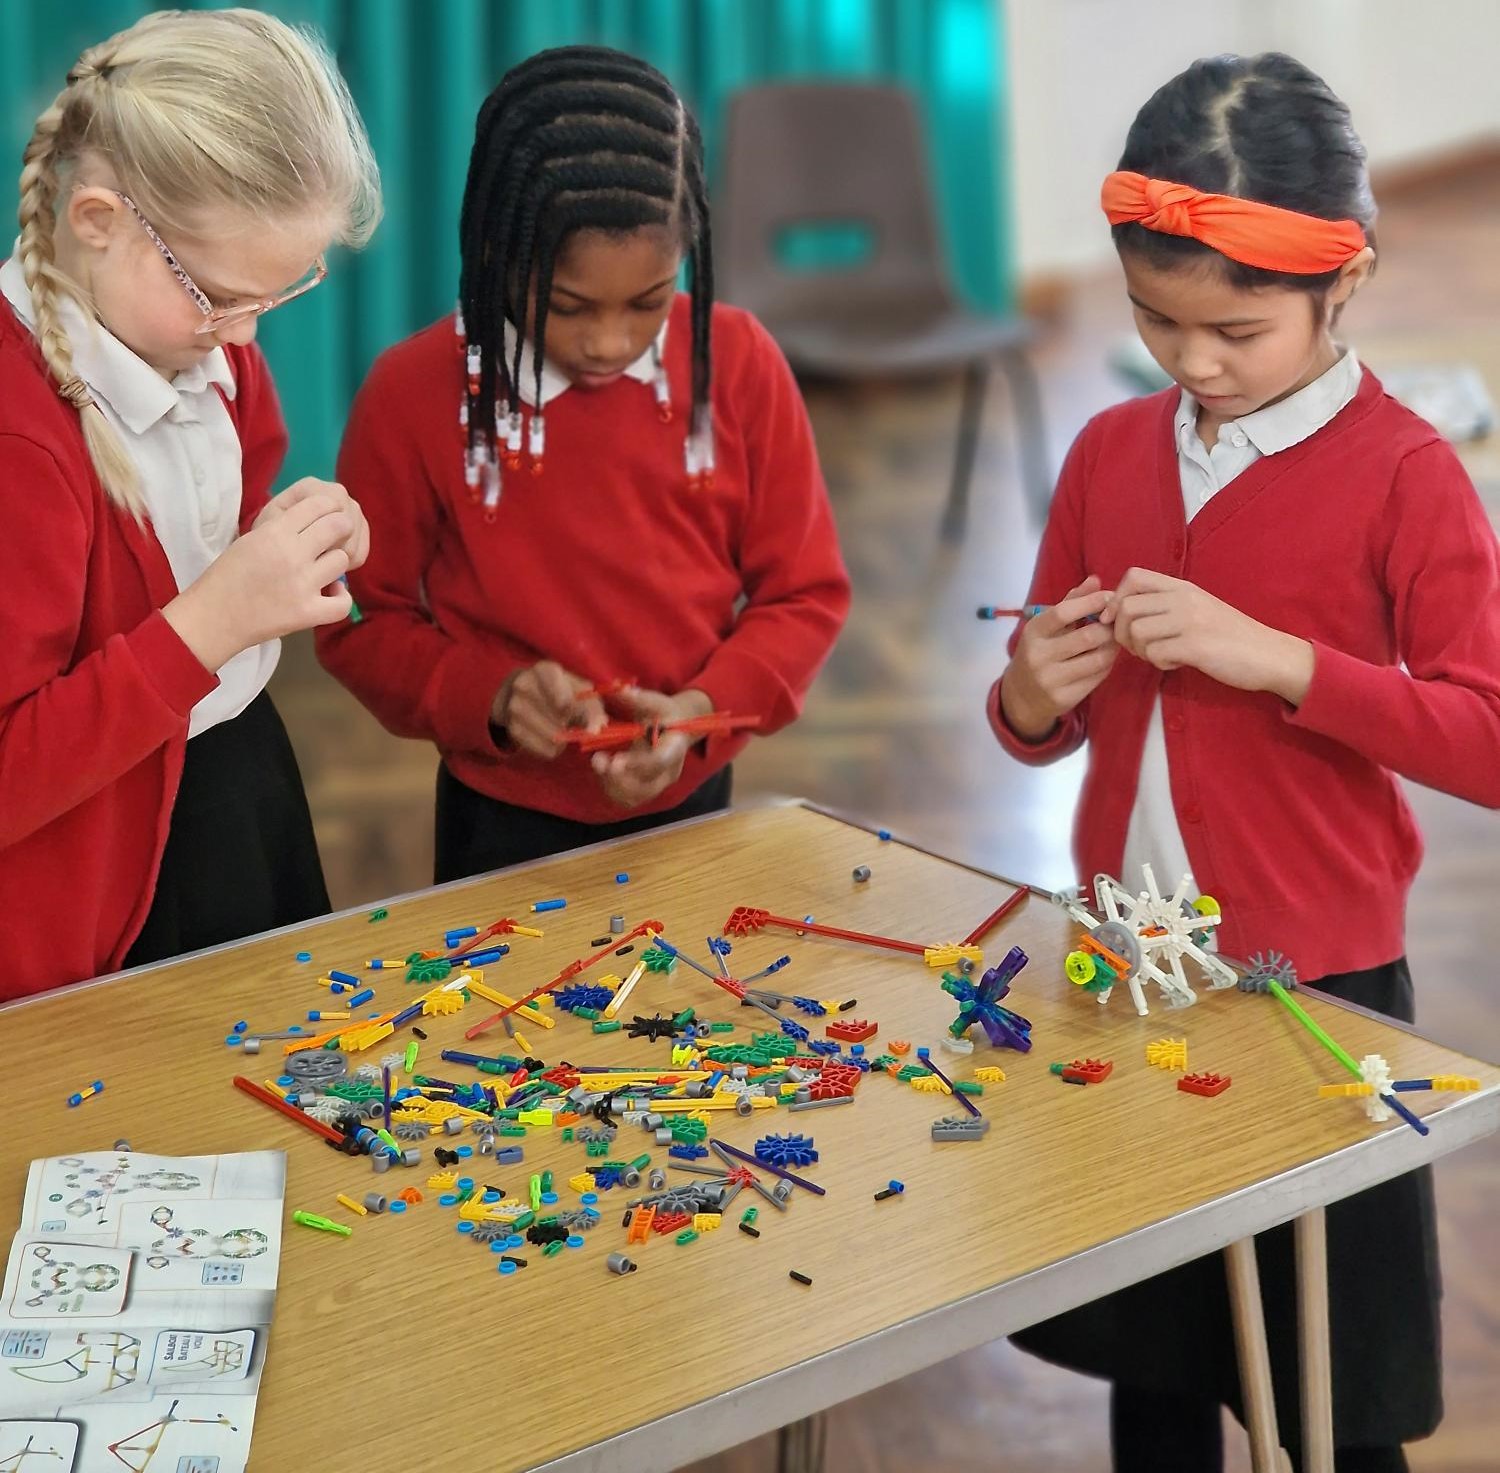 Primary school image to be used for Knex